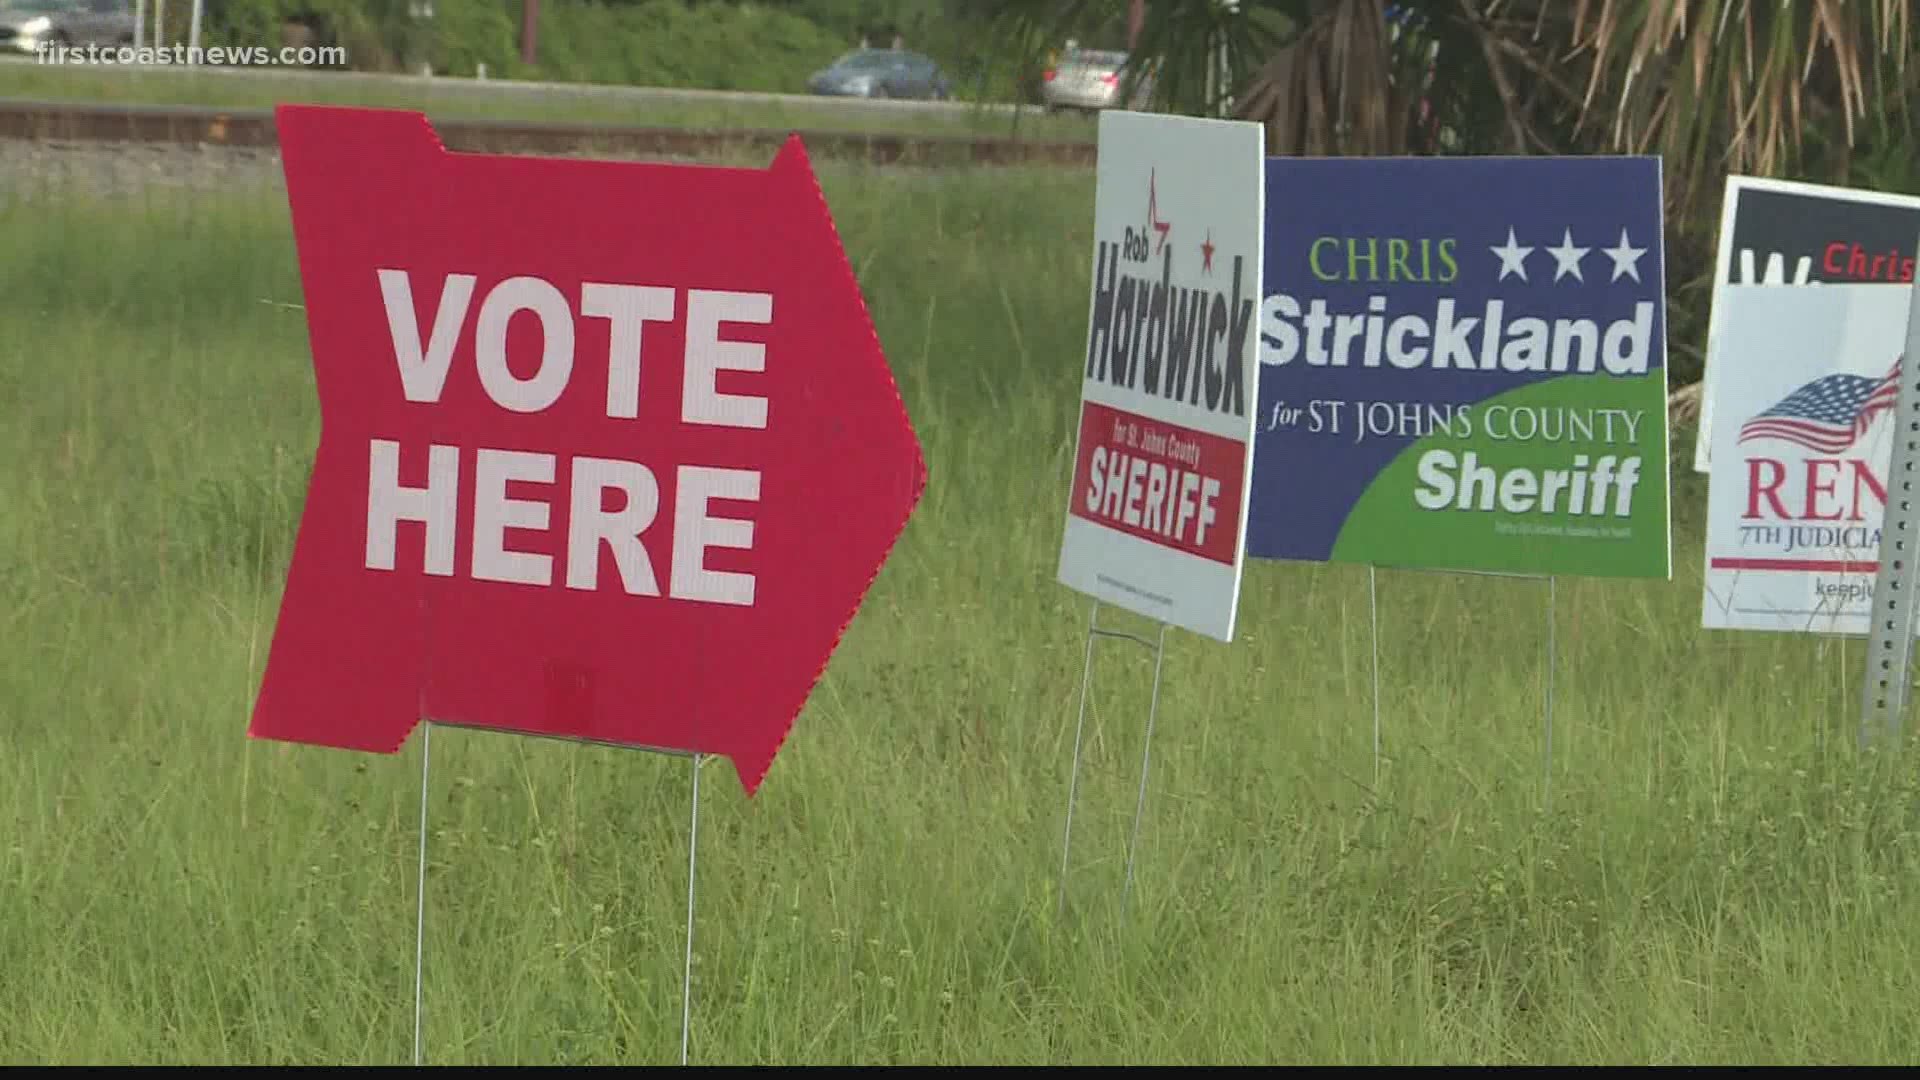 The supervisor of elections says a percentage of party representation hasn't changed much despite the high-profile sheriff race among two Republican candidates.